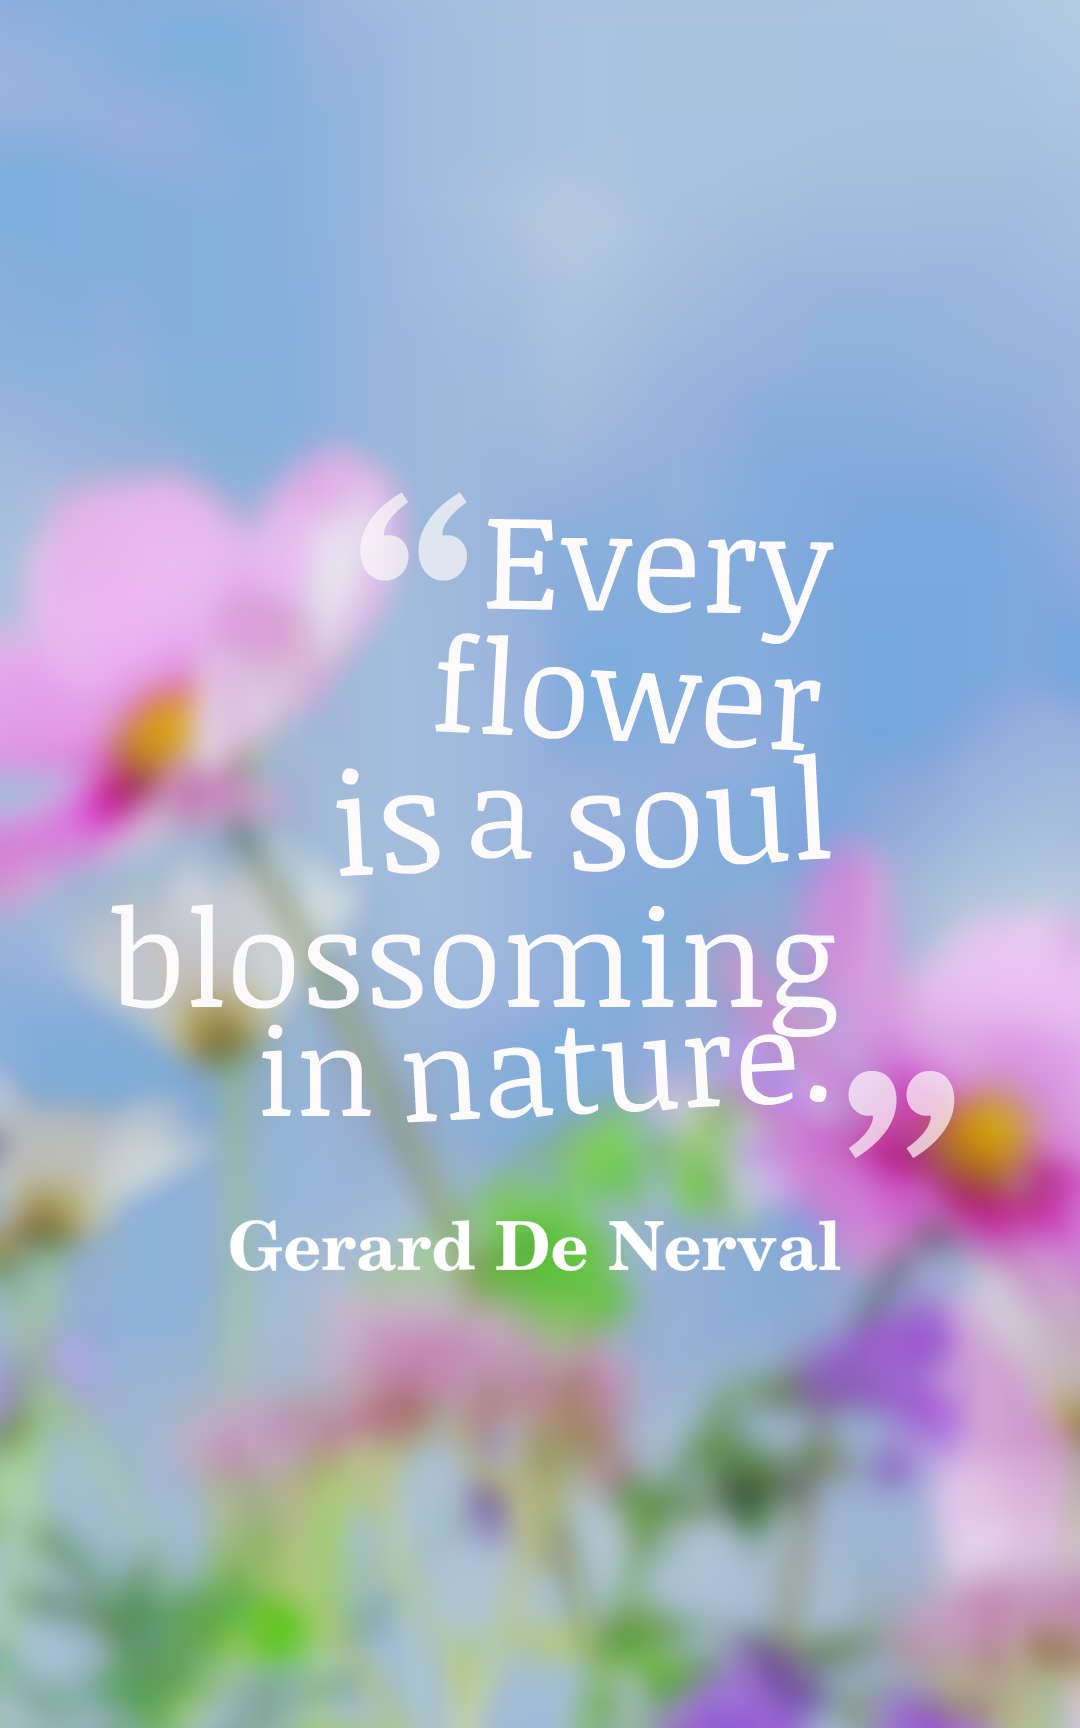 Every flower is a soul blossoming in nature.